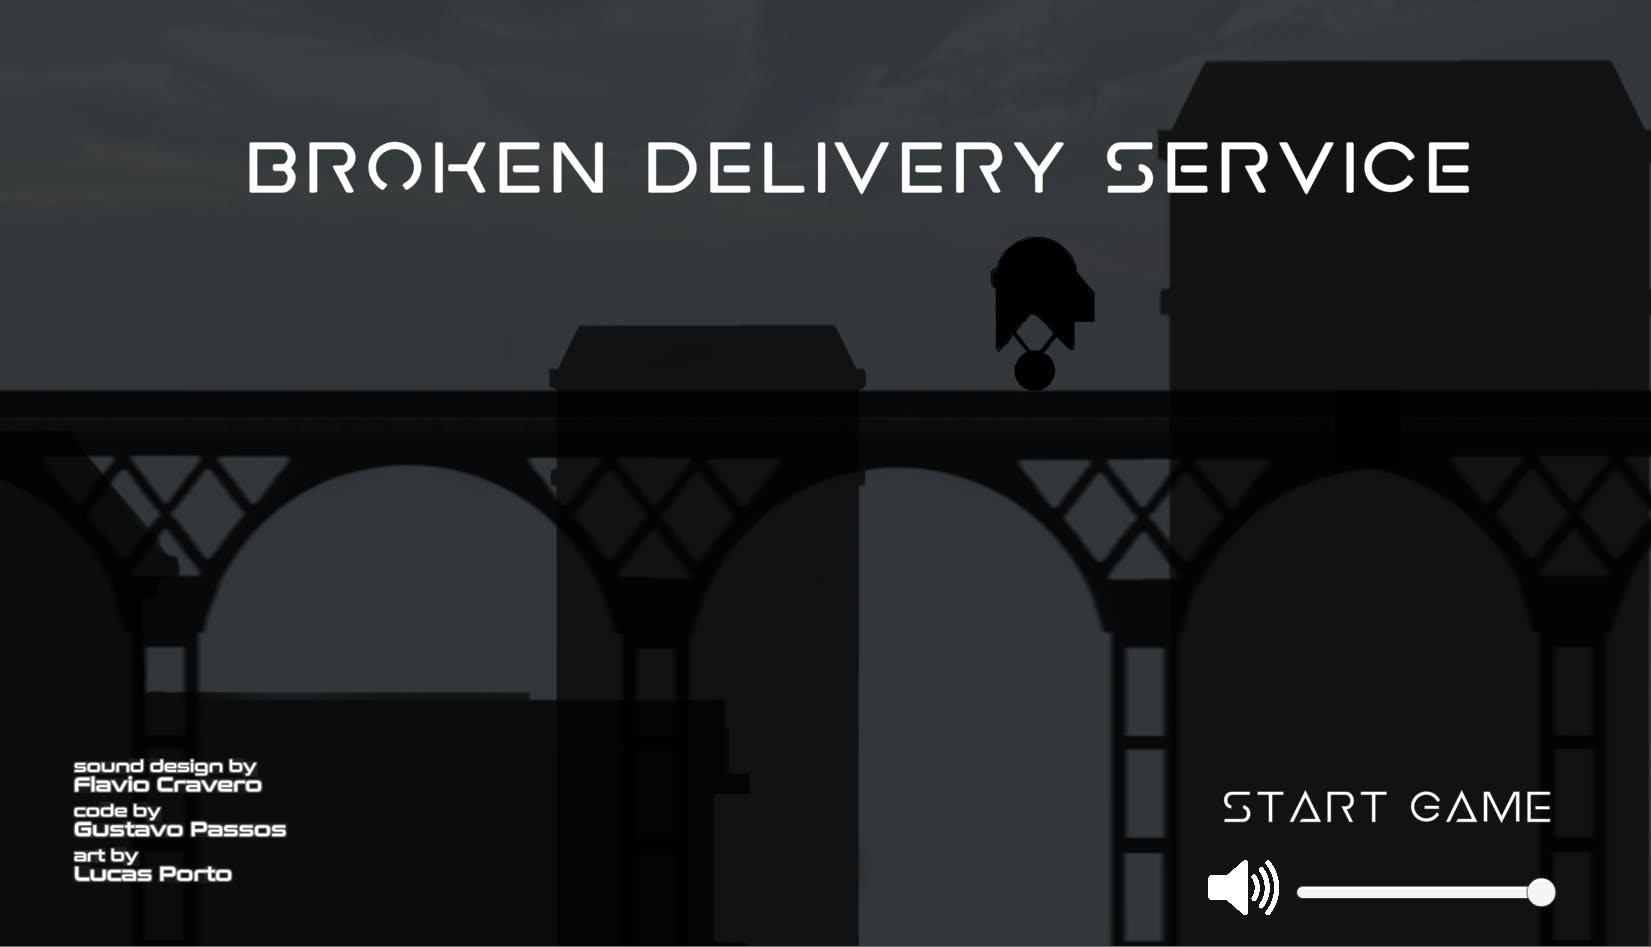 the start screen from broken delivery service, with the robot's silhouette, game title, credits and options to start and change the game's volume